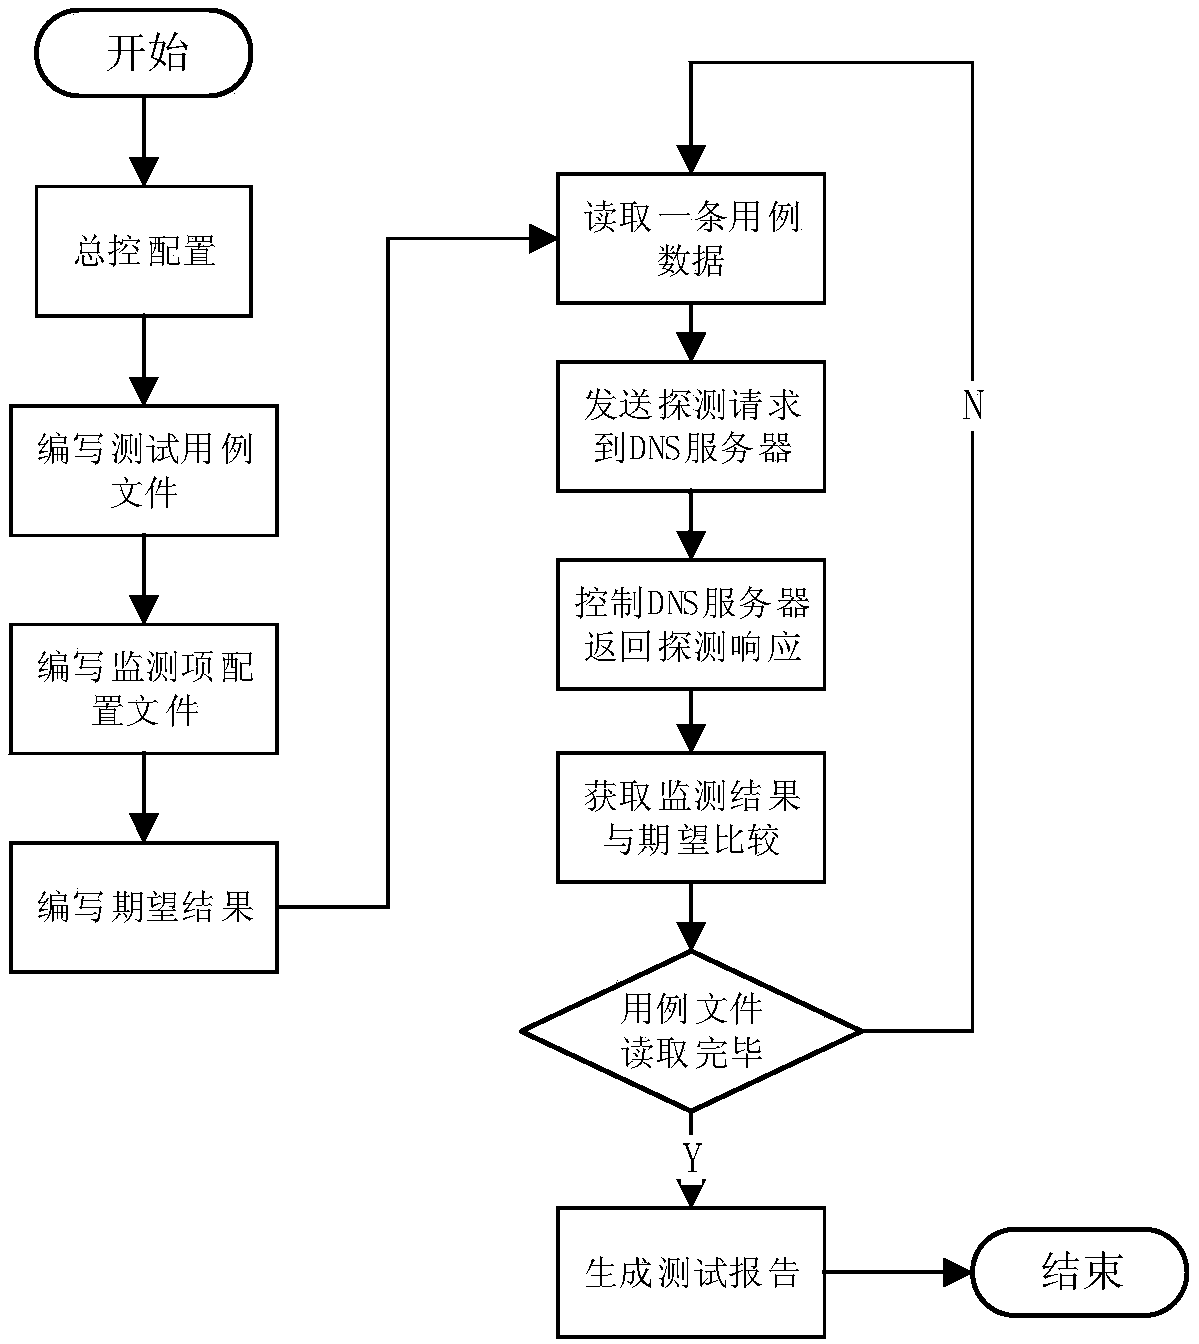 A dns monitoring service automated testing method and system